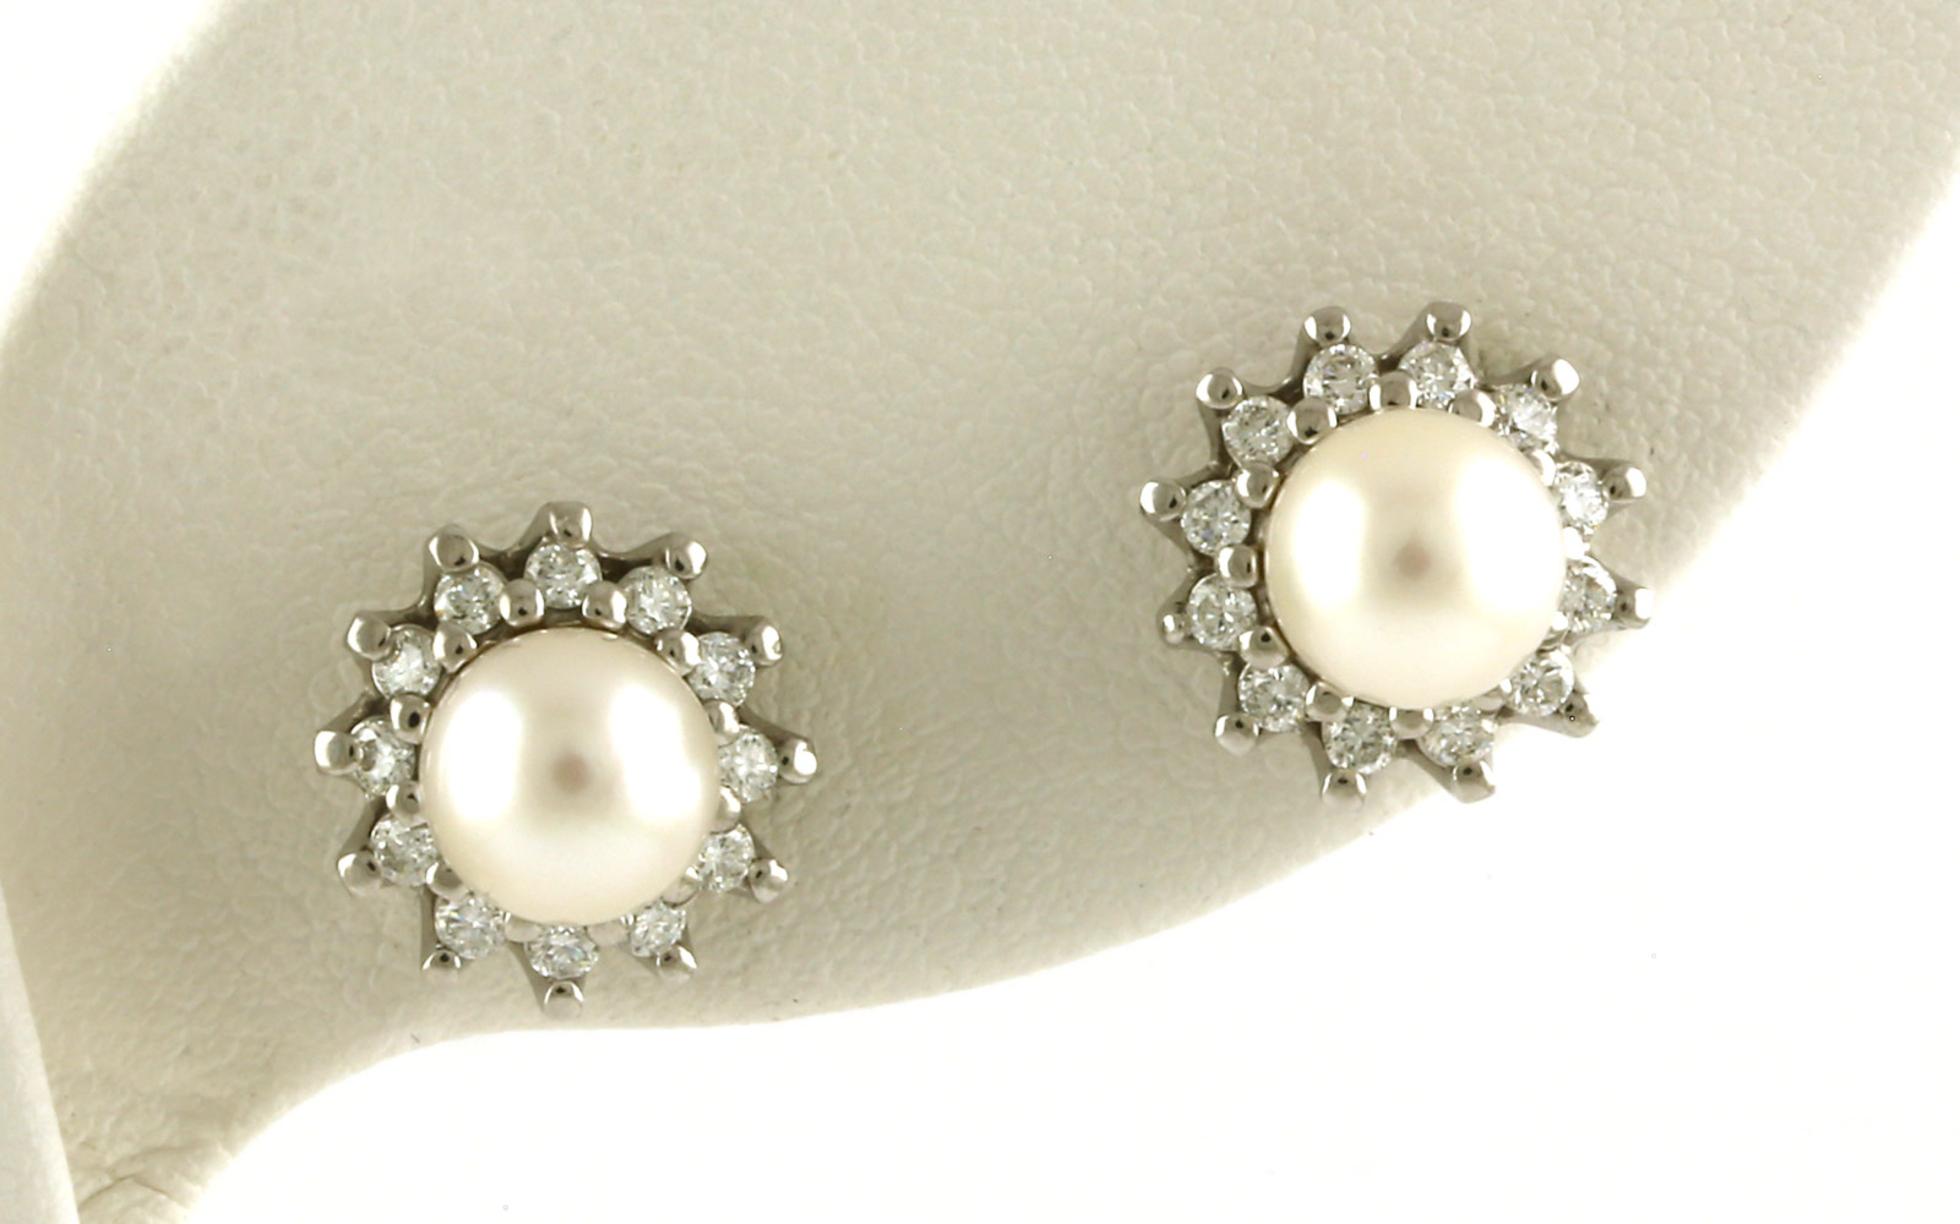 Halo-style Pearl and Diamond Stud Earrings in White Gold